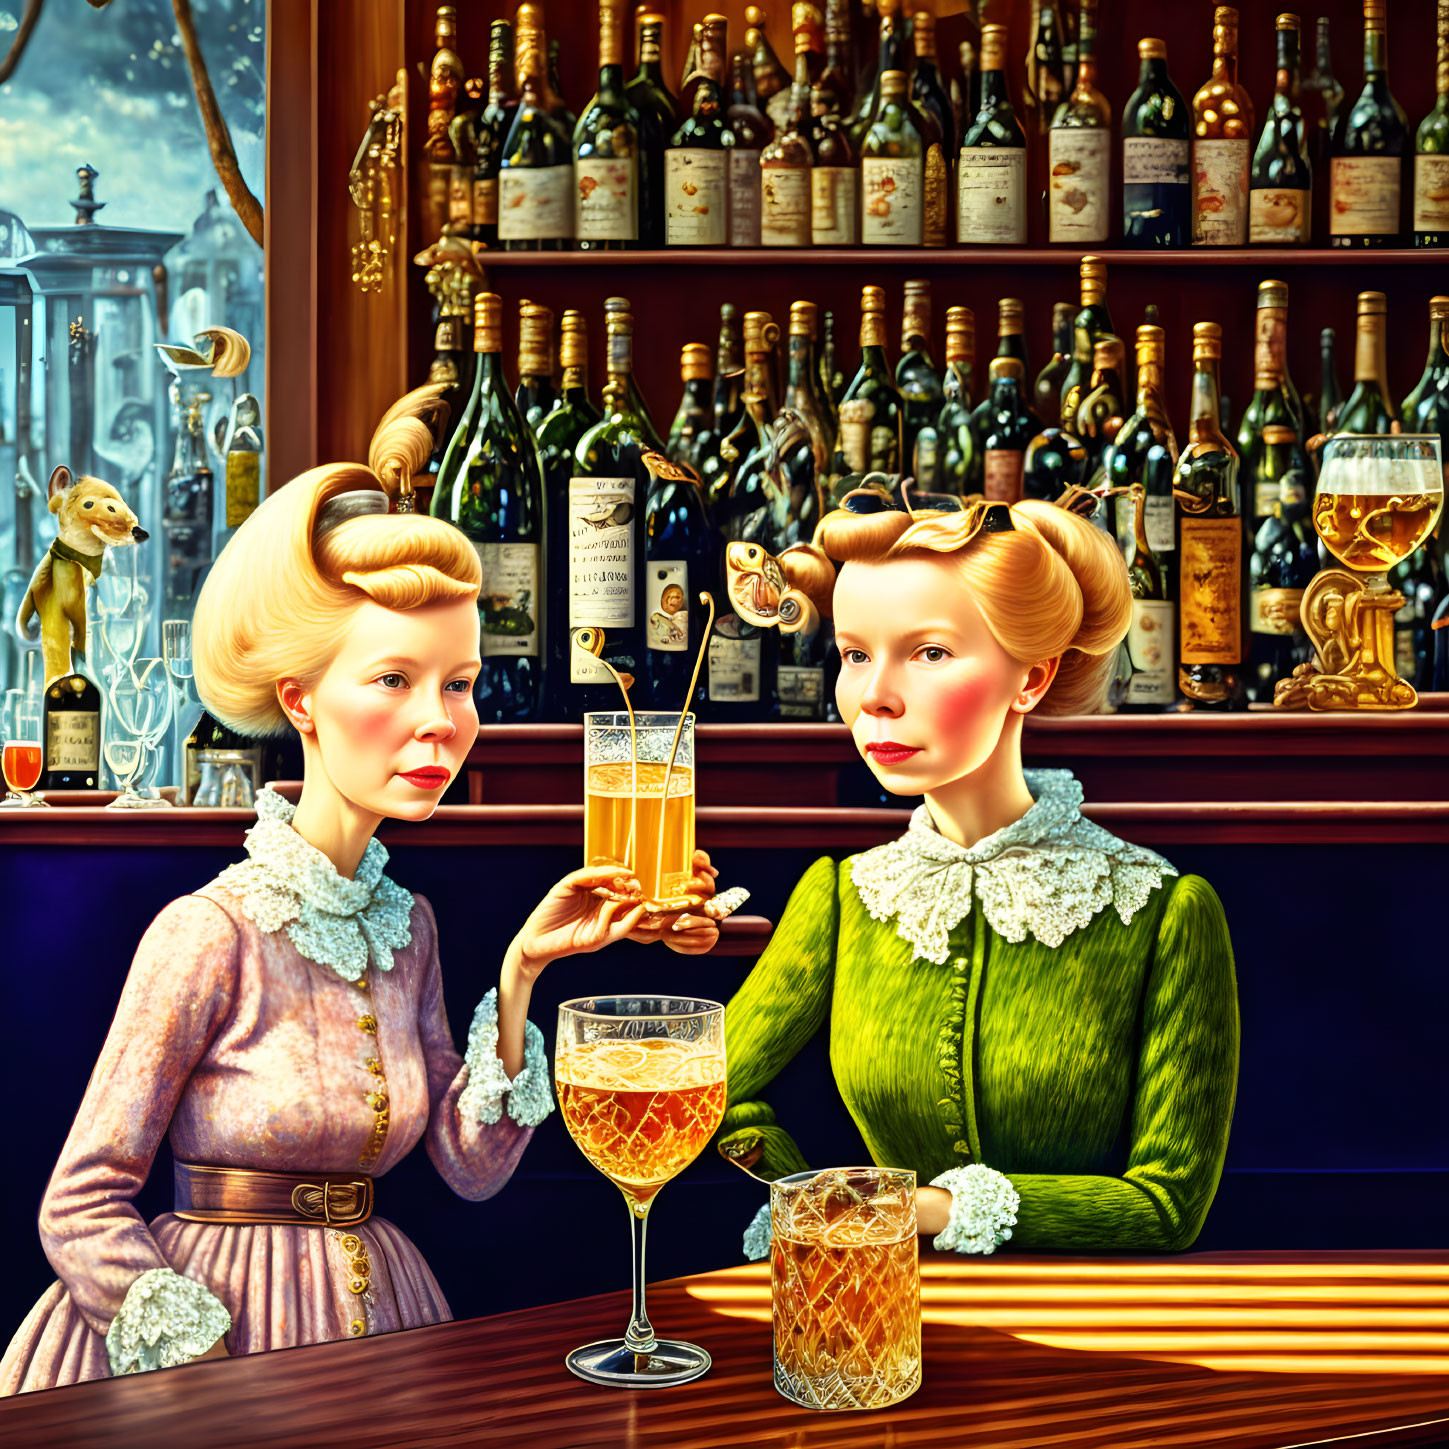 Tove Jansson and her friend in a bar